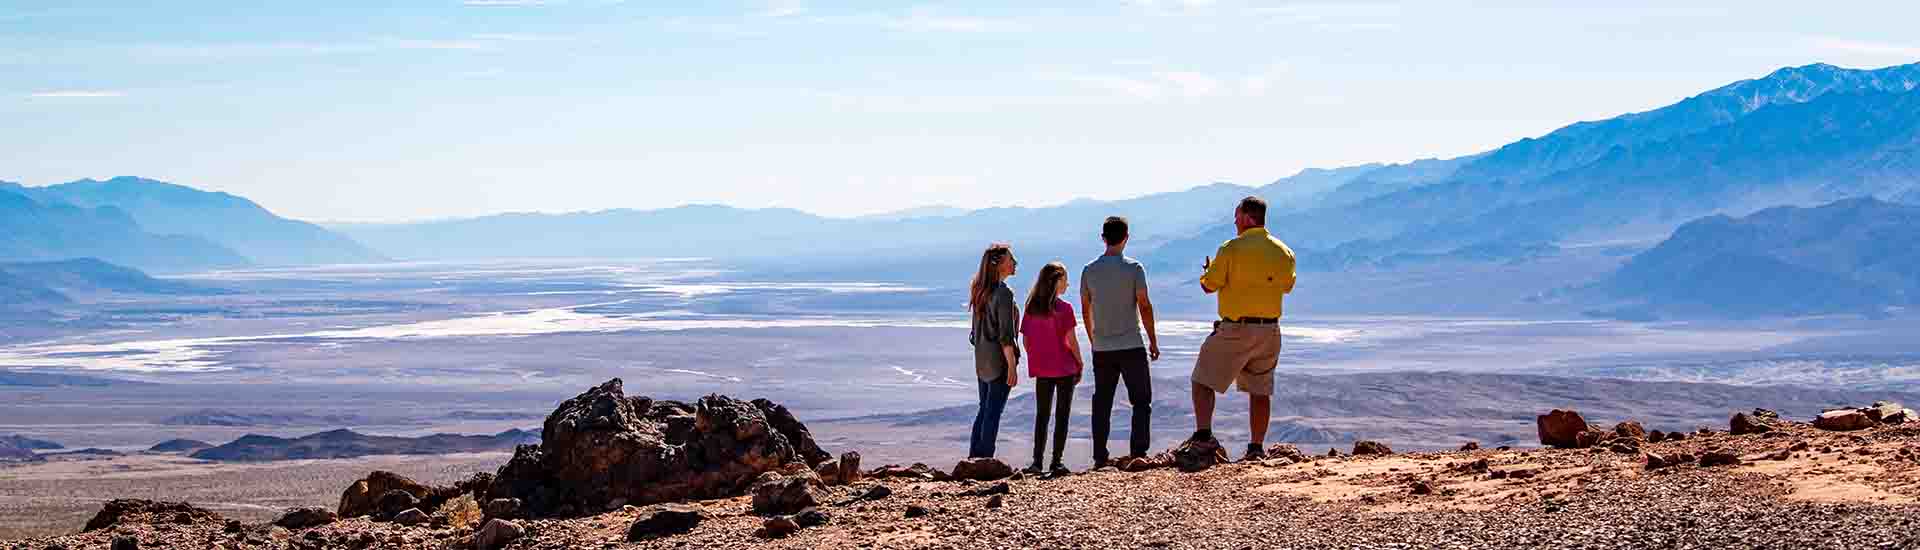  Pink Adventure Tour guide and guests standing on hill, looking out over salt flats at Death Valley National Park